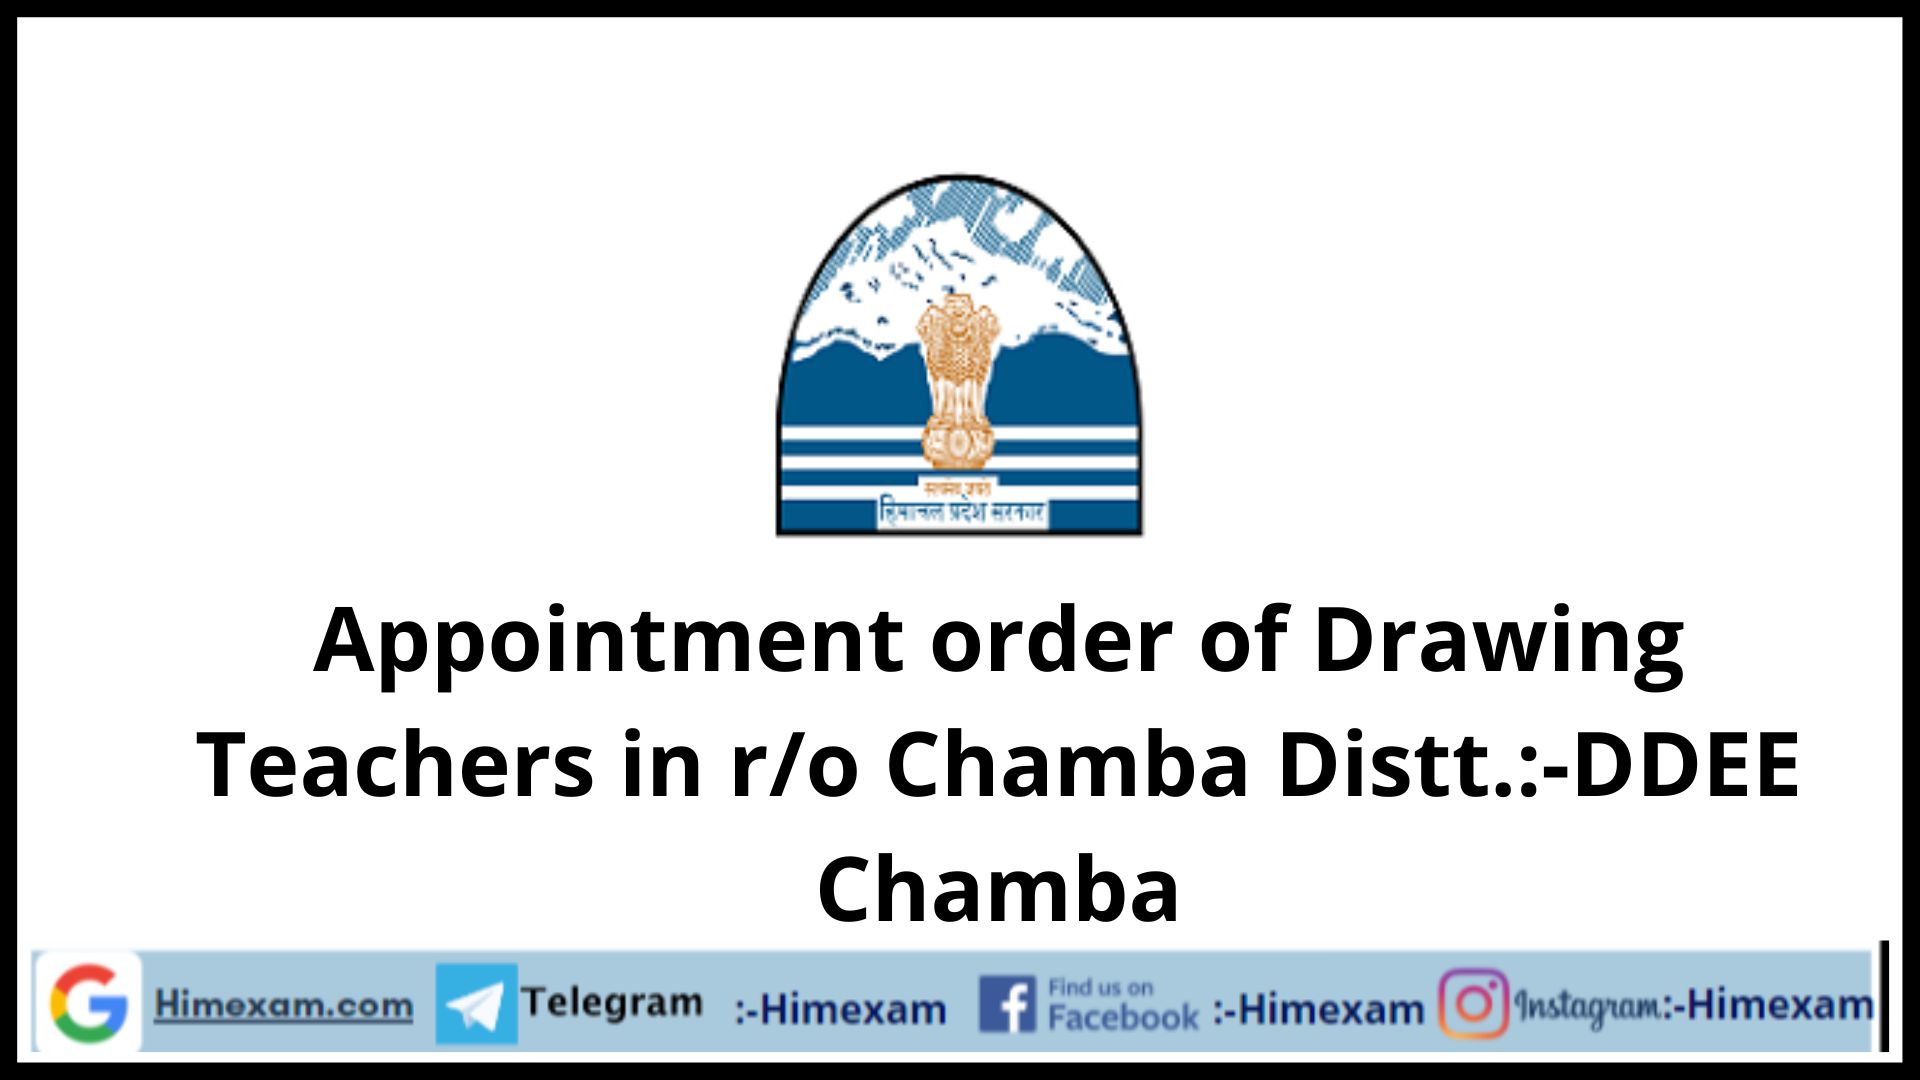 Appointment order of Drawing Teachers in r/o Chamba Distt.:-DDEE Chamba